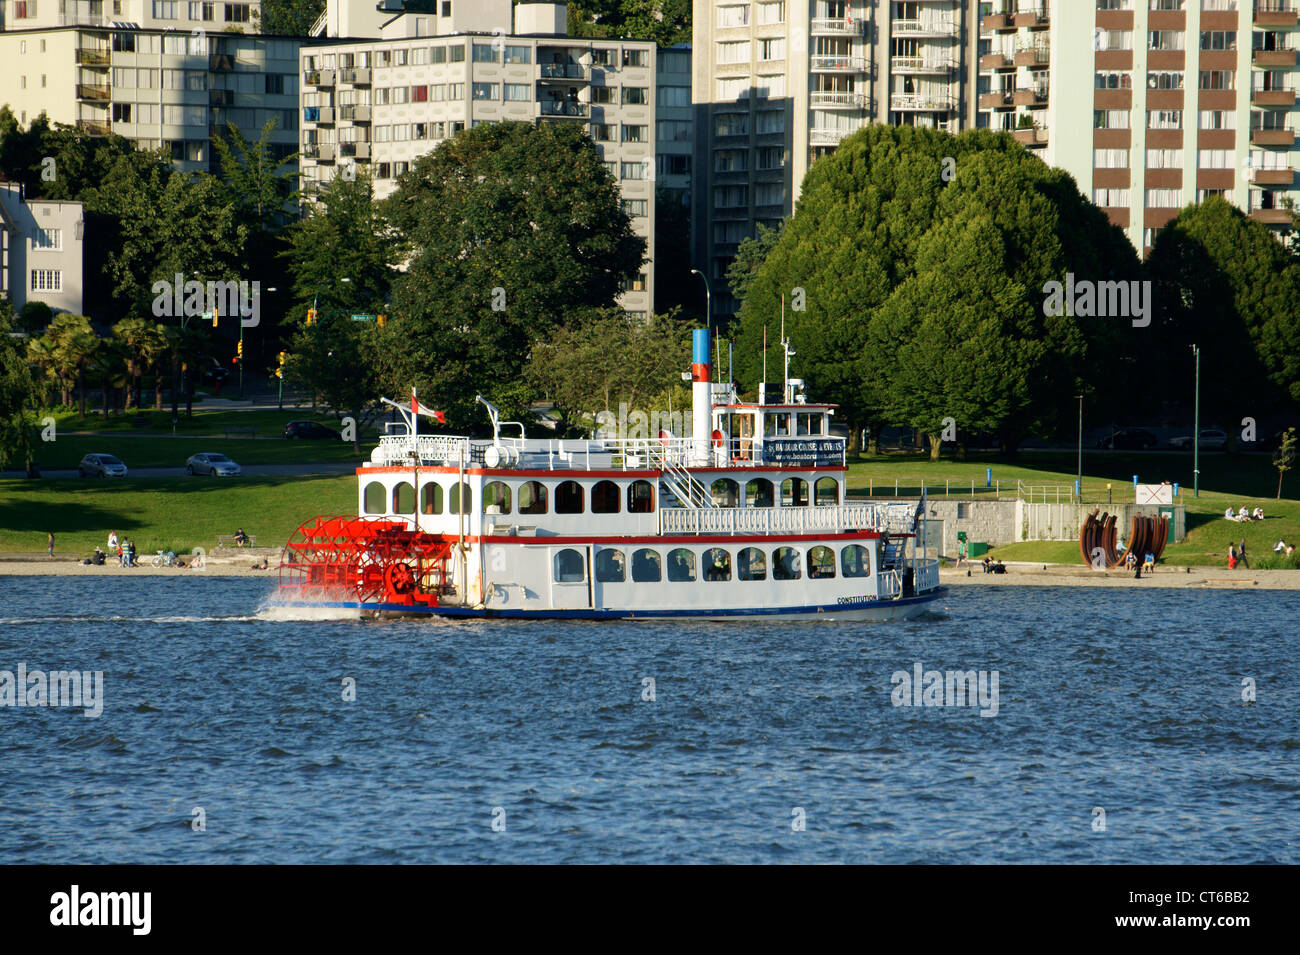 MPV Constitution paddlewheeler or sternwheeler sightseeing boat with West End skyline in back, English Bay, Vancouver, British Columbia, Canada Stock Photo